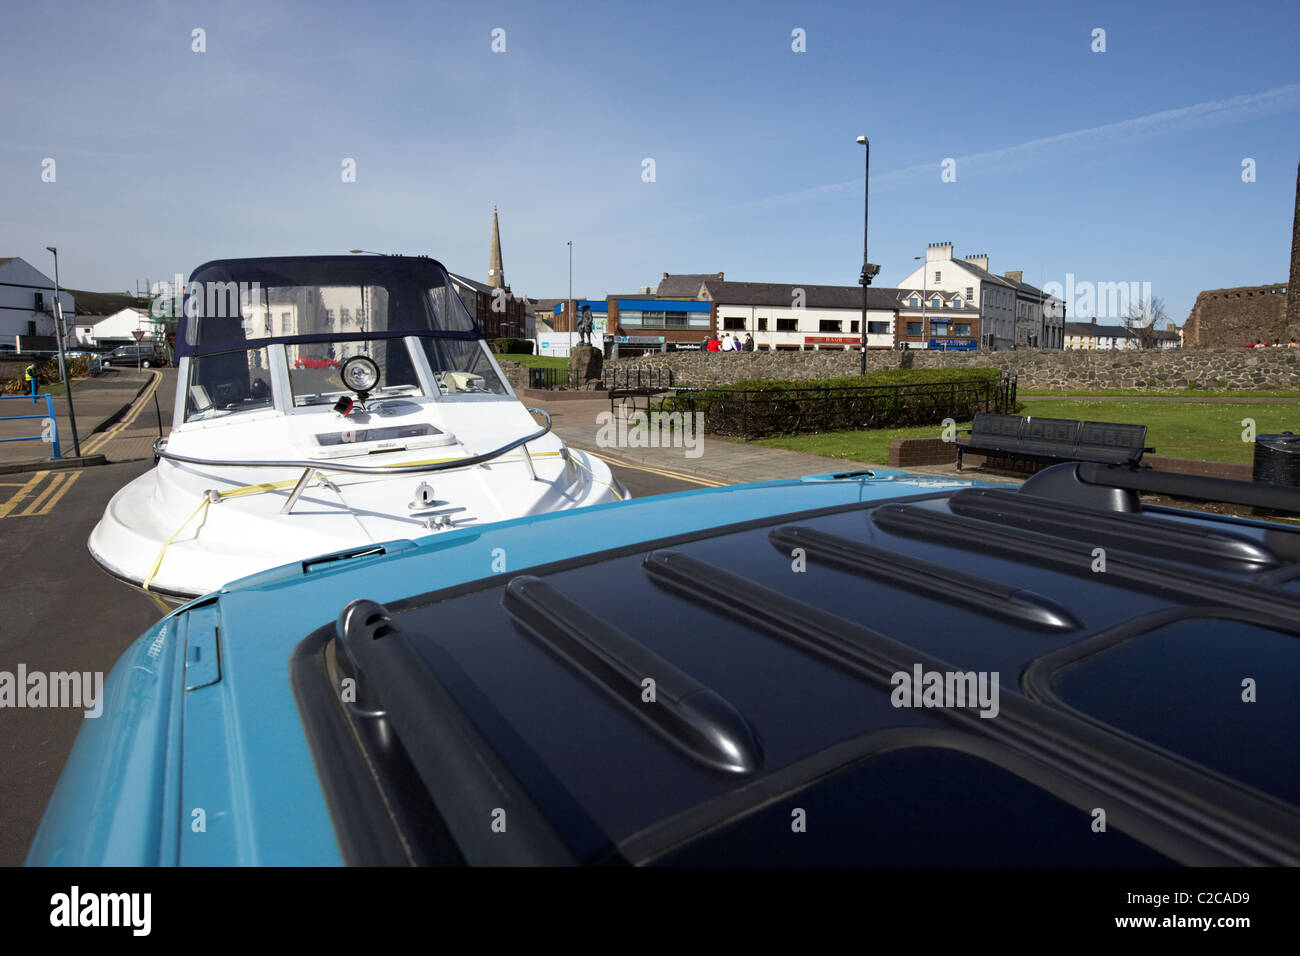 car towing boat on trailer in the uk Stock Photo